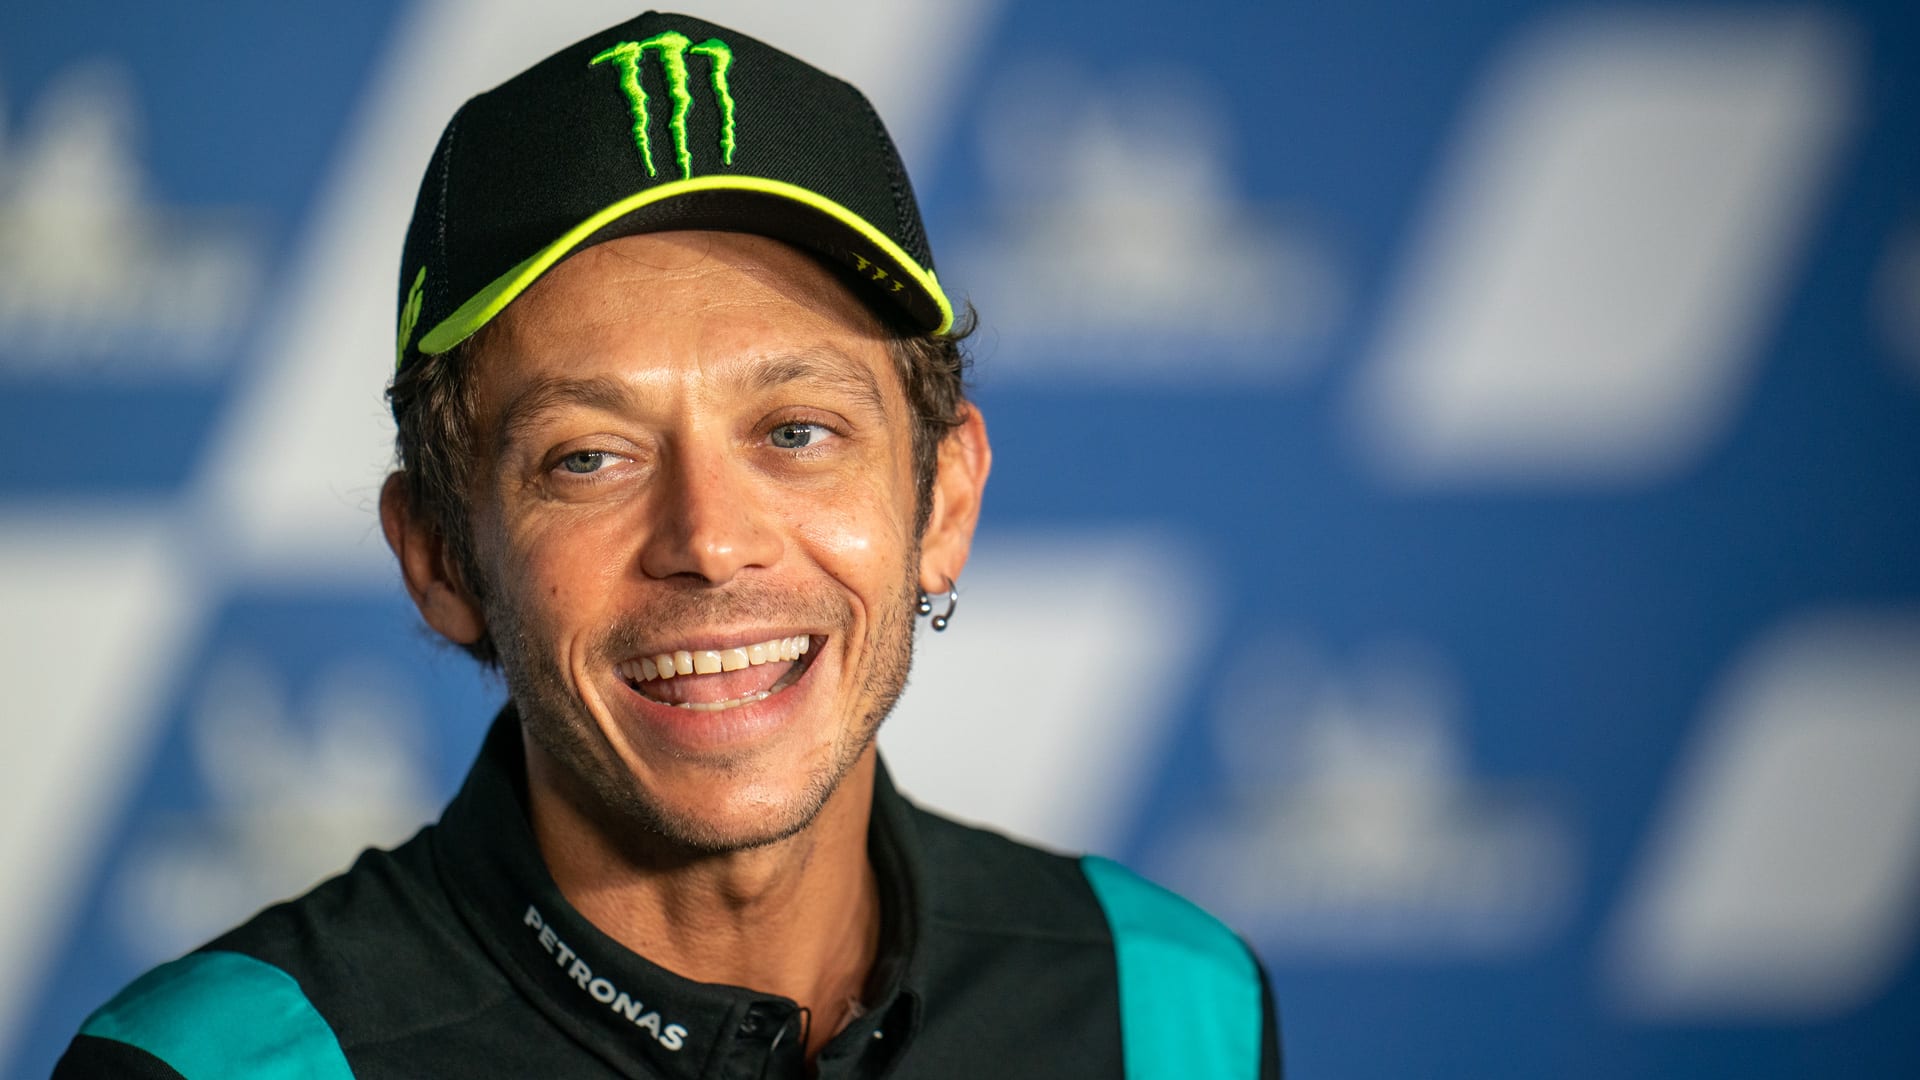 Norris and Hamilton pay tribute to seven-time MotoGP champion Valentino Rossi ahead of his final race Formula 1®